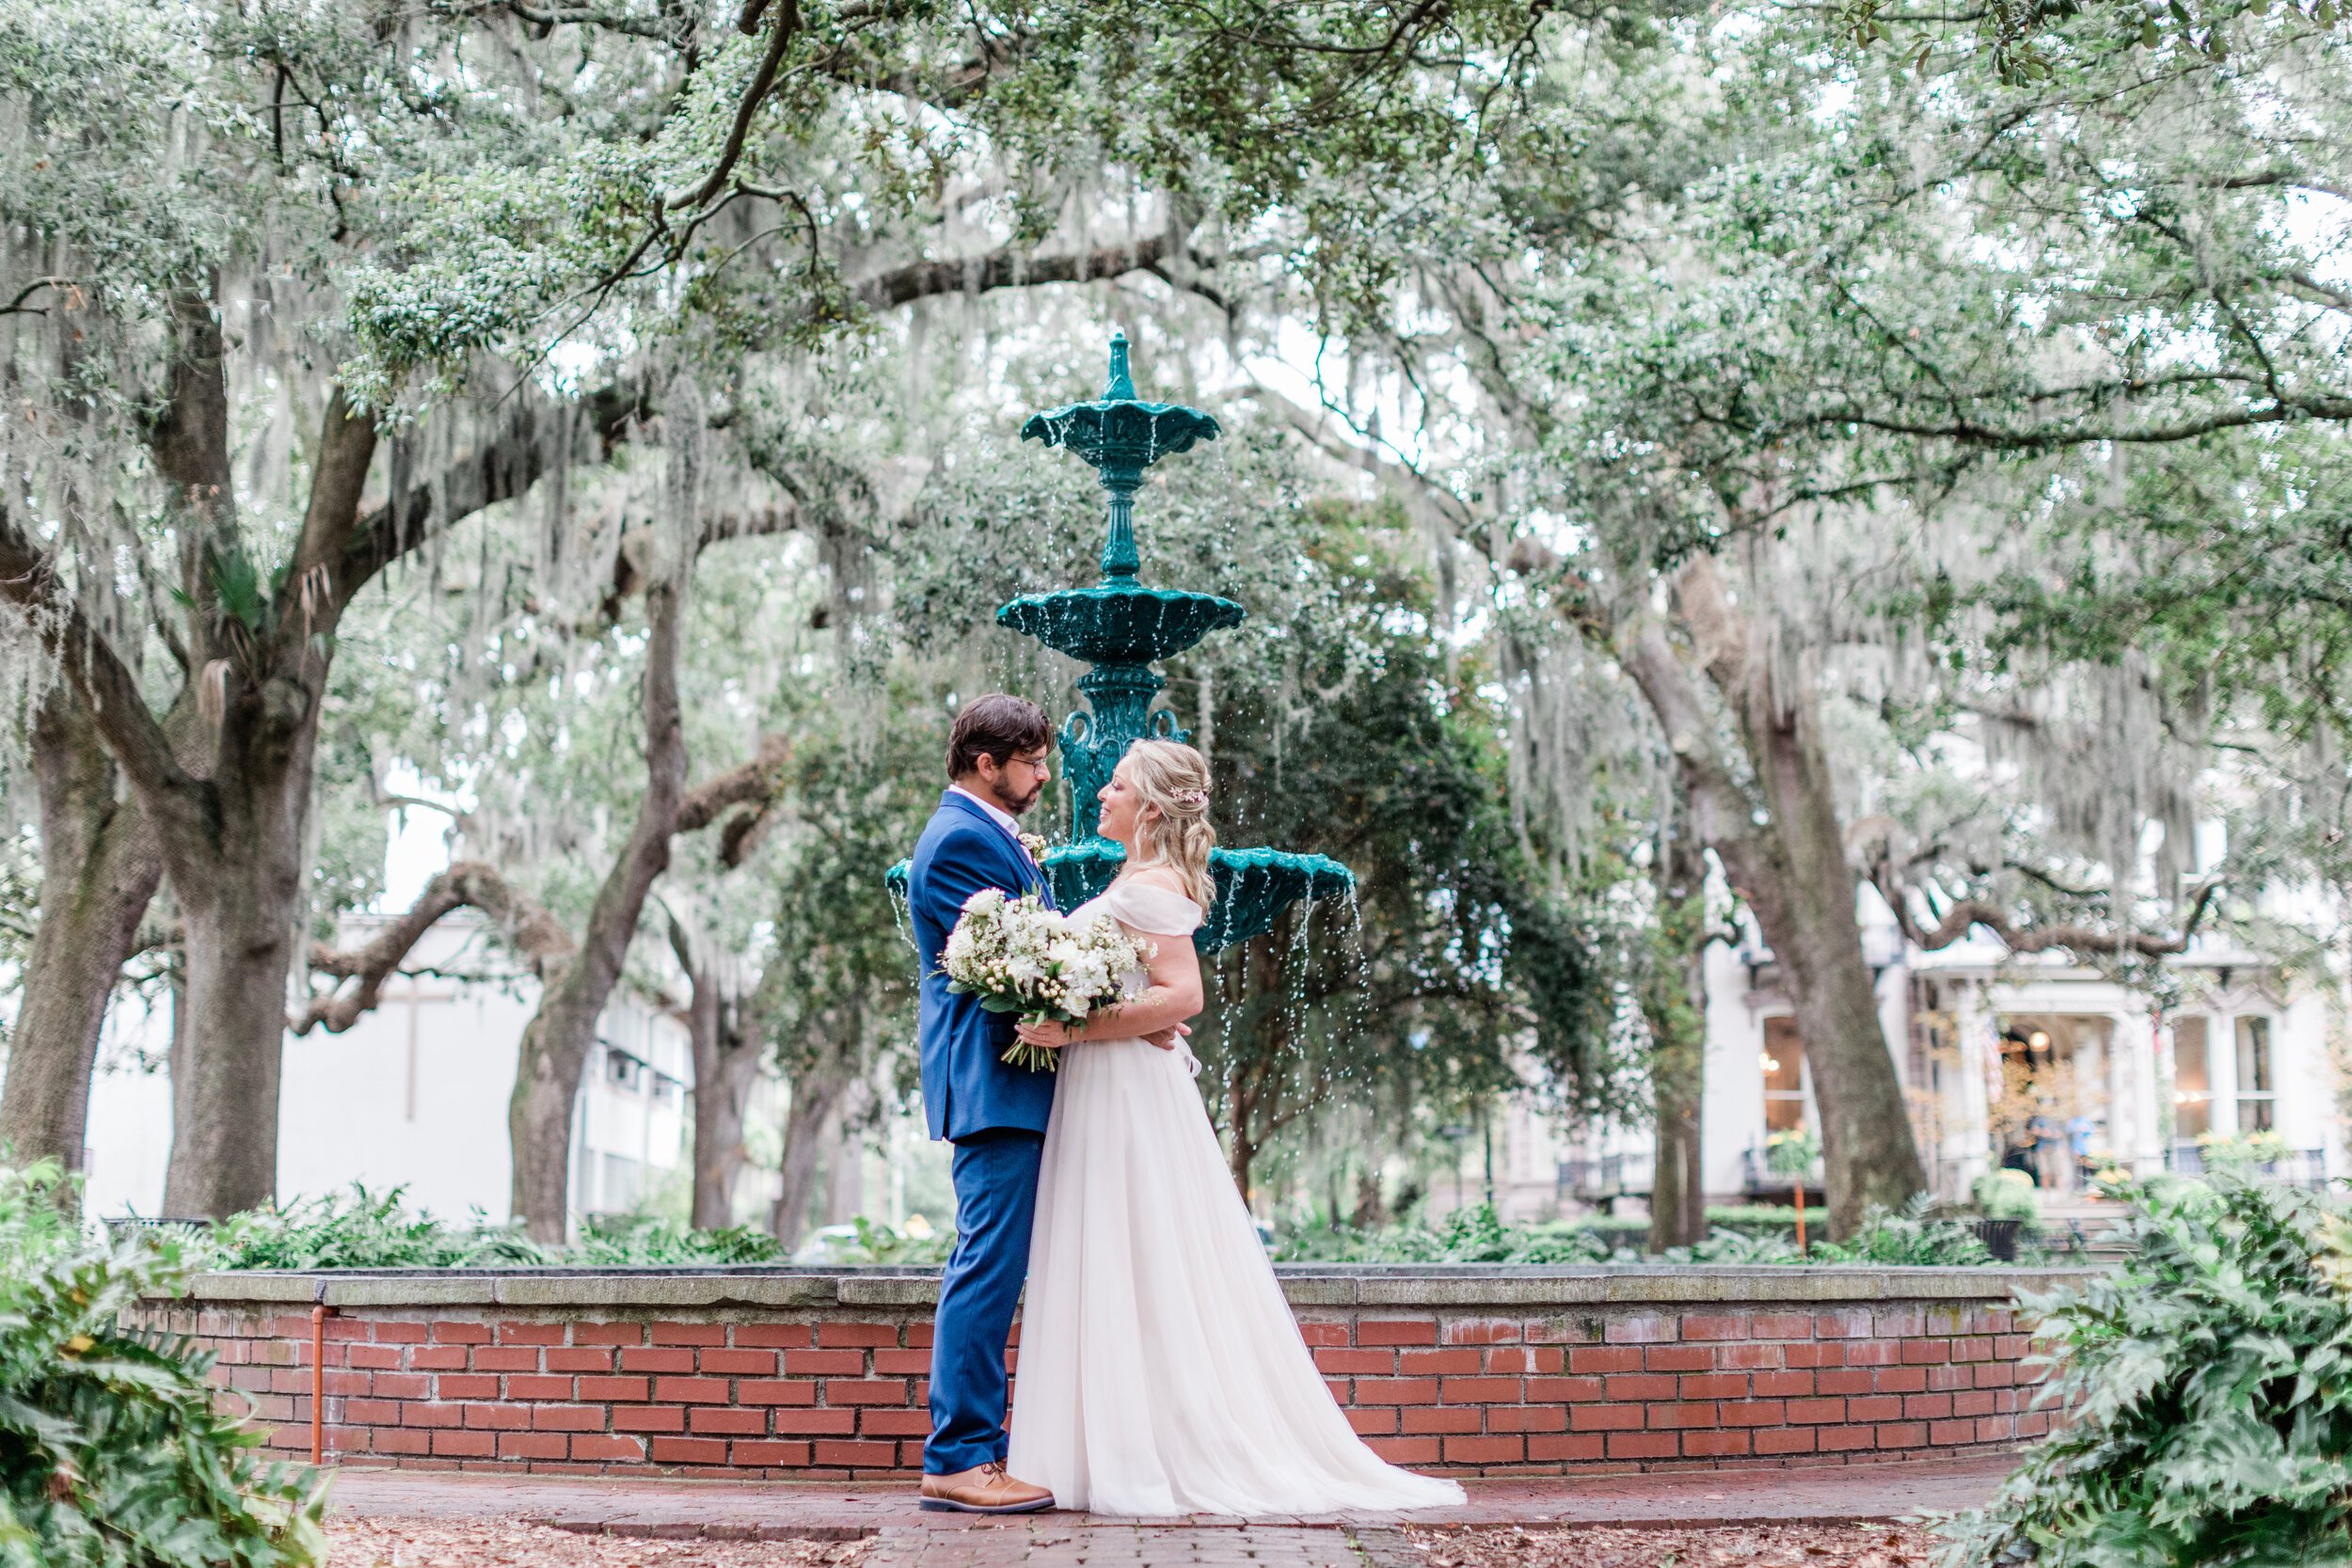 ivory-and-beau-florals-elopement-flowers-savannah-elopement-package-elopement-florist-savannah-florist-flowers-florals-traditional-wedding-flowers-white-ivory-flowers-classic-AptBPhoto_JenJoe-99.jpg